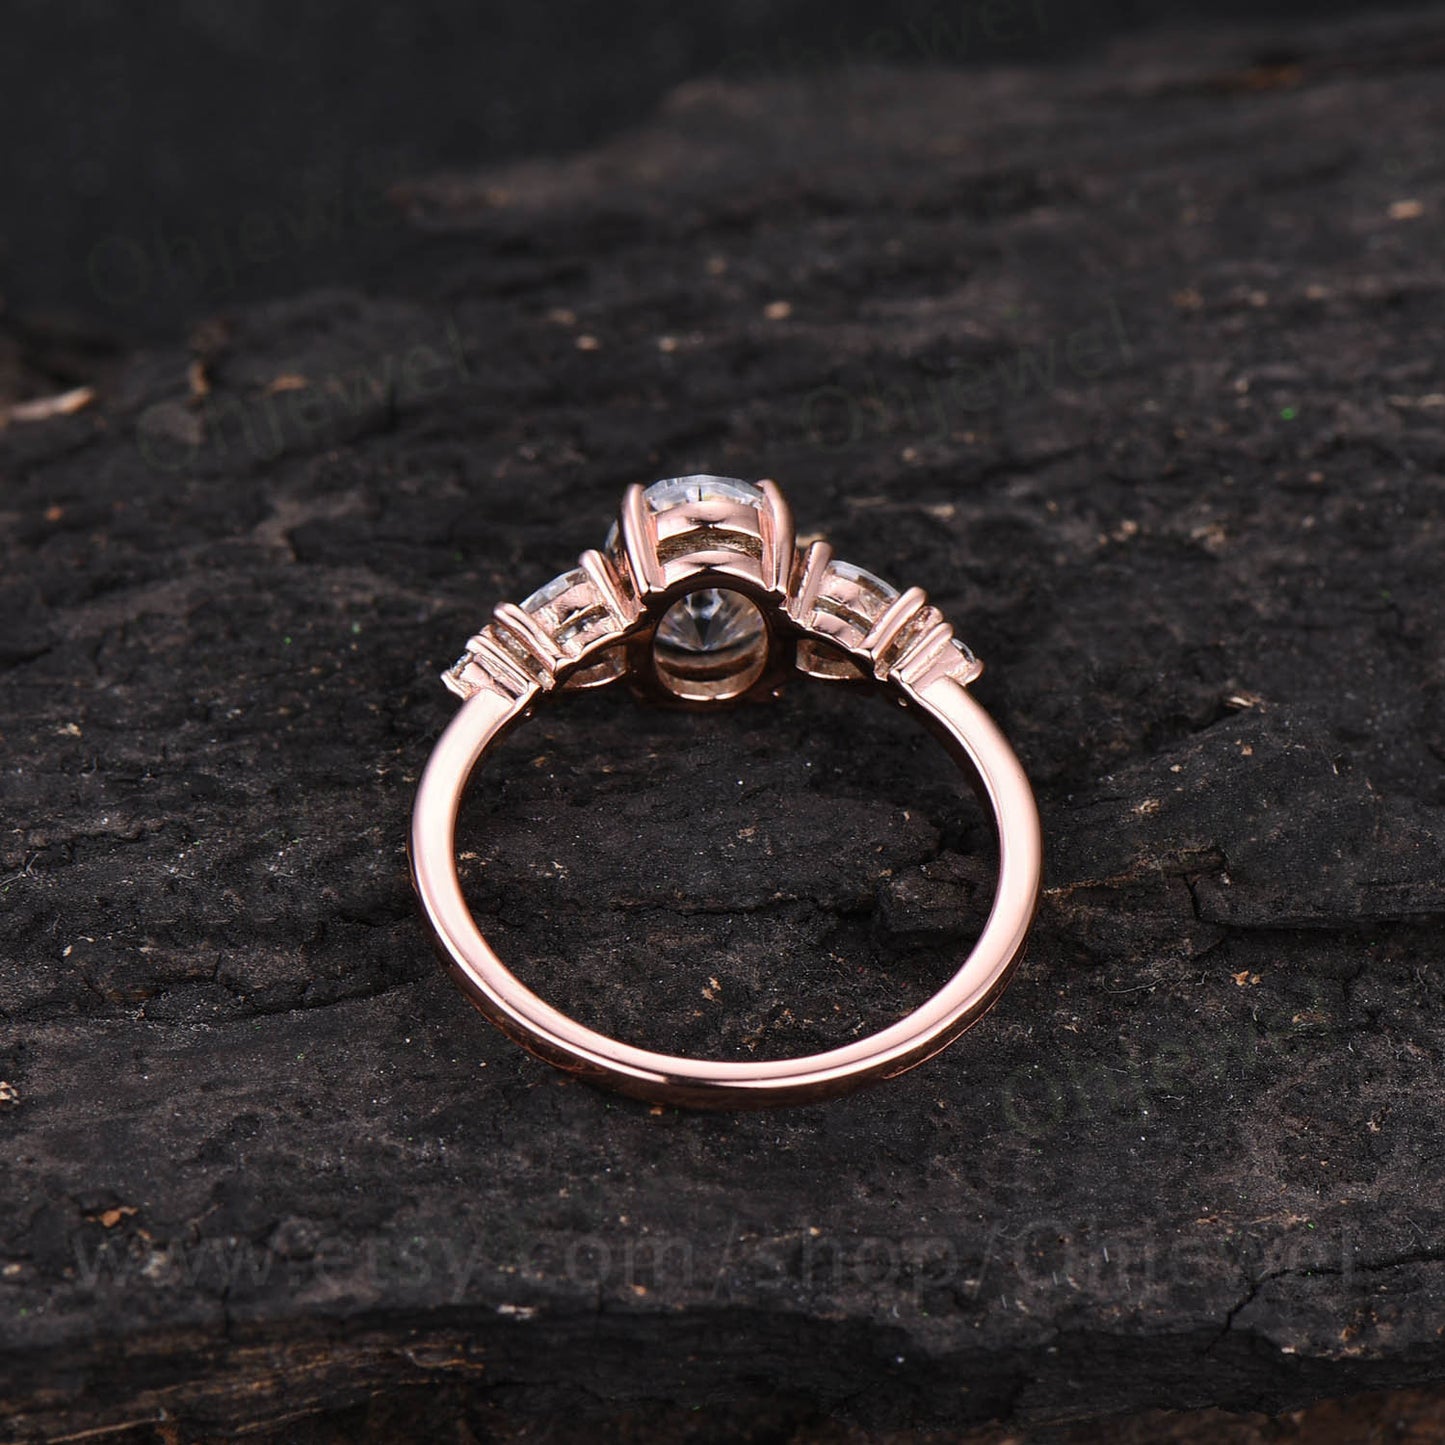 Vintage oval moissanite engagement ring five stone unique pear moissanite ring for women rose gold anniversary gift sterling silver ring